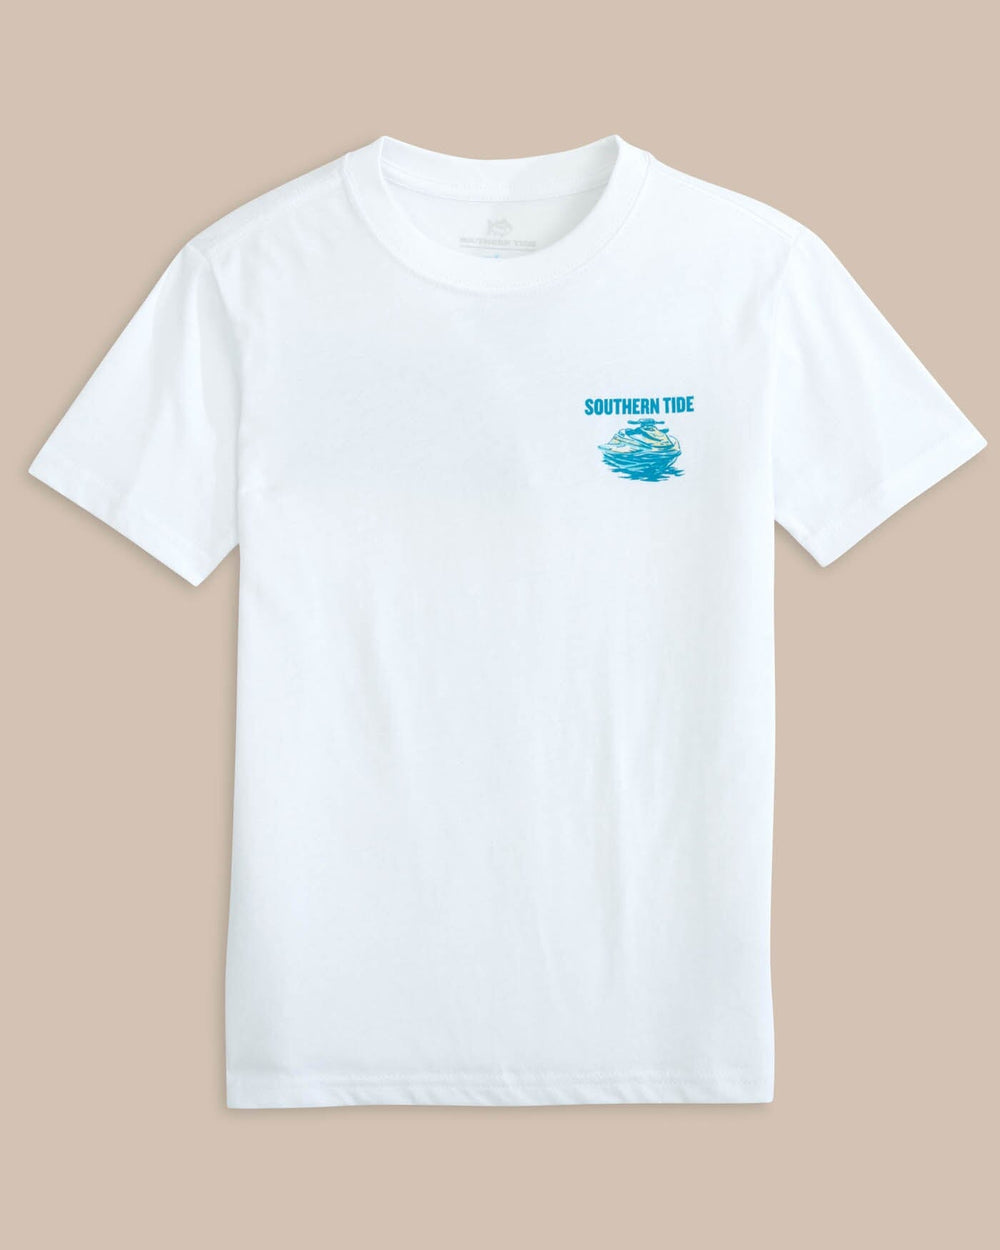 The front view of the Southern Tide Kids Jet Ski-son Short Sleeve T-shirt by Southern Tide - Classic White